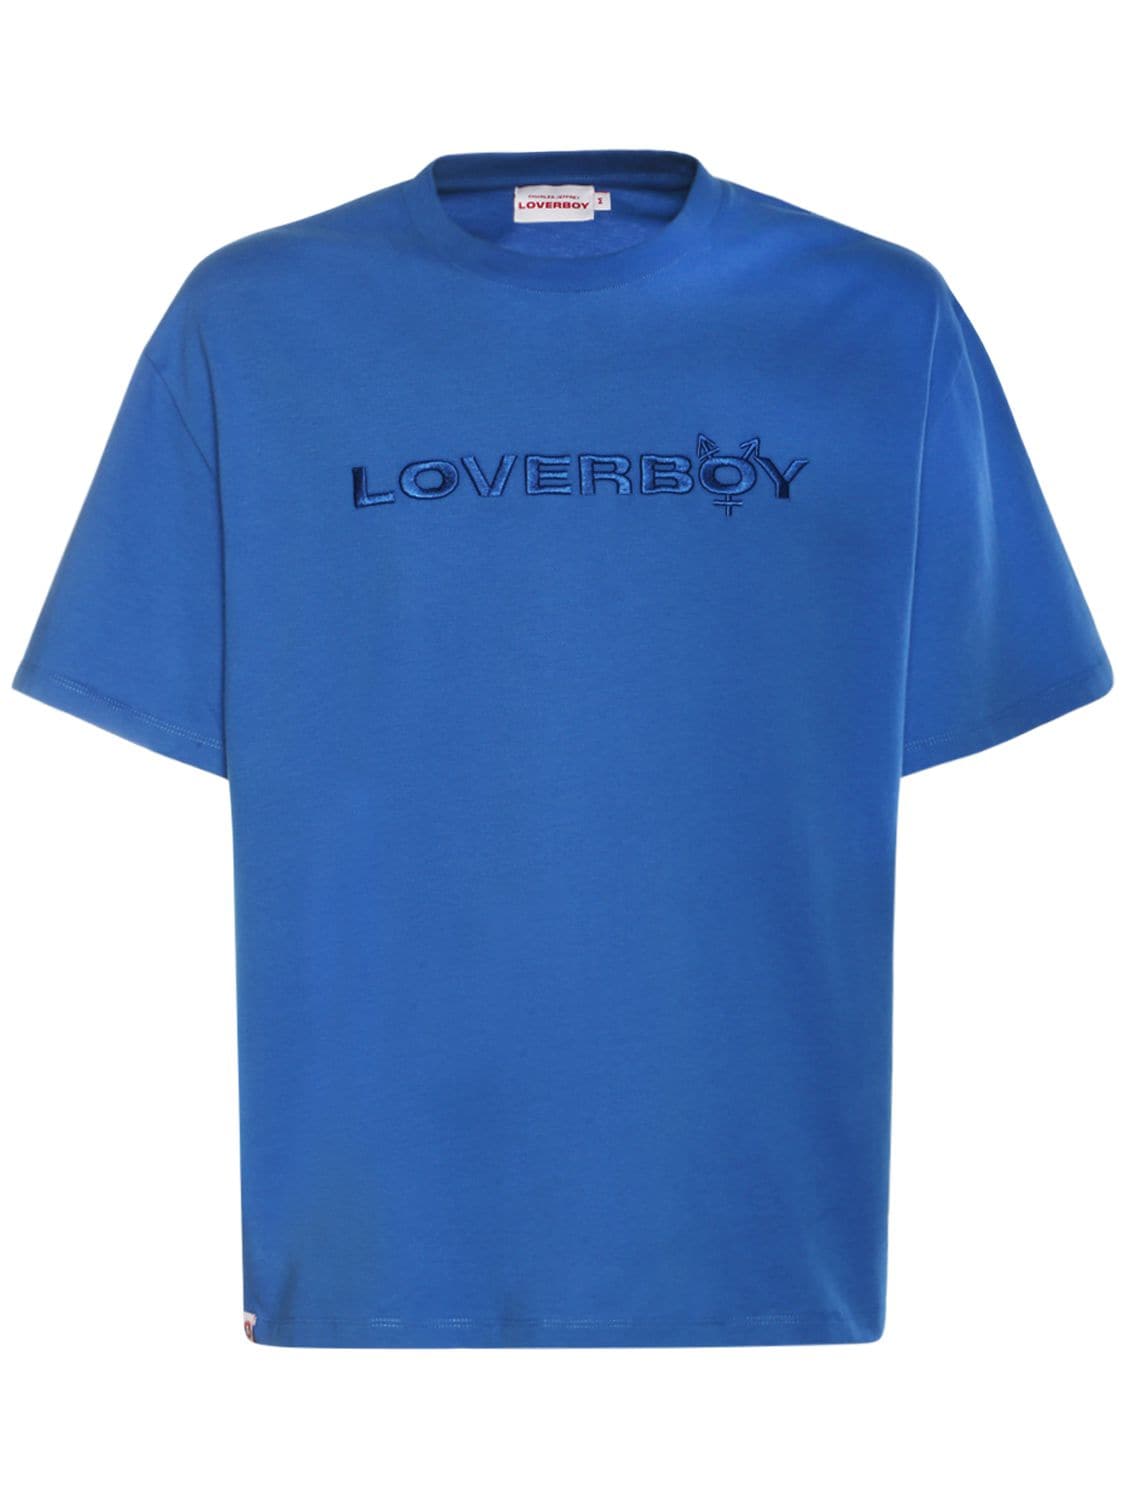 CHARLES JEFFREY LOVERBOY LOGO EMBROIDERY COTTON JERSEY T-SHIRT